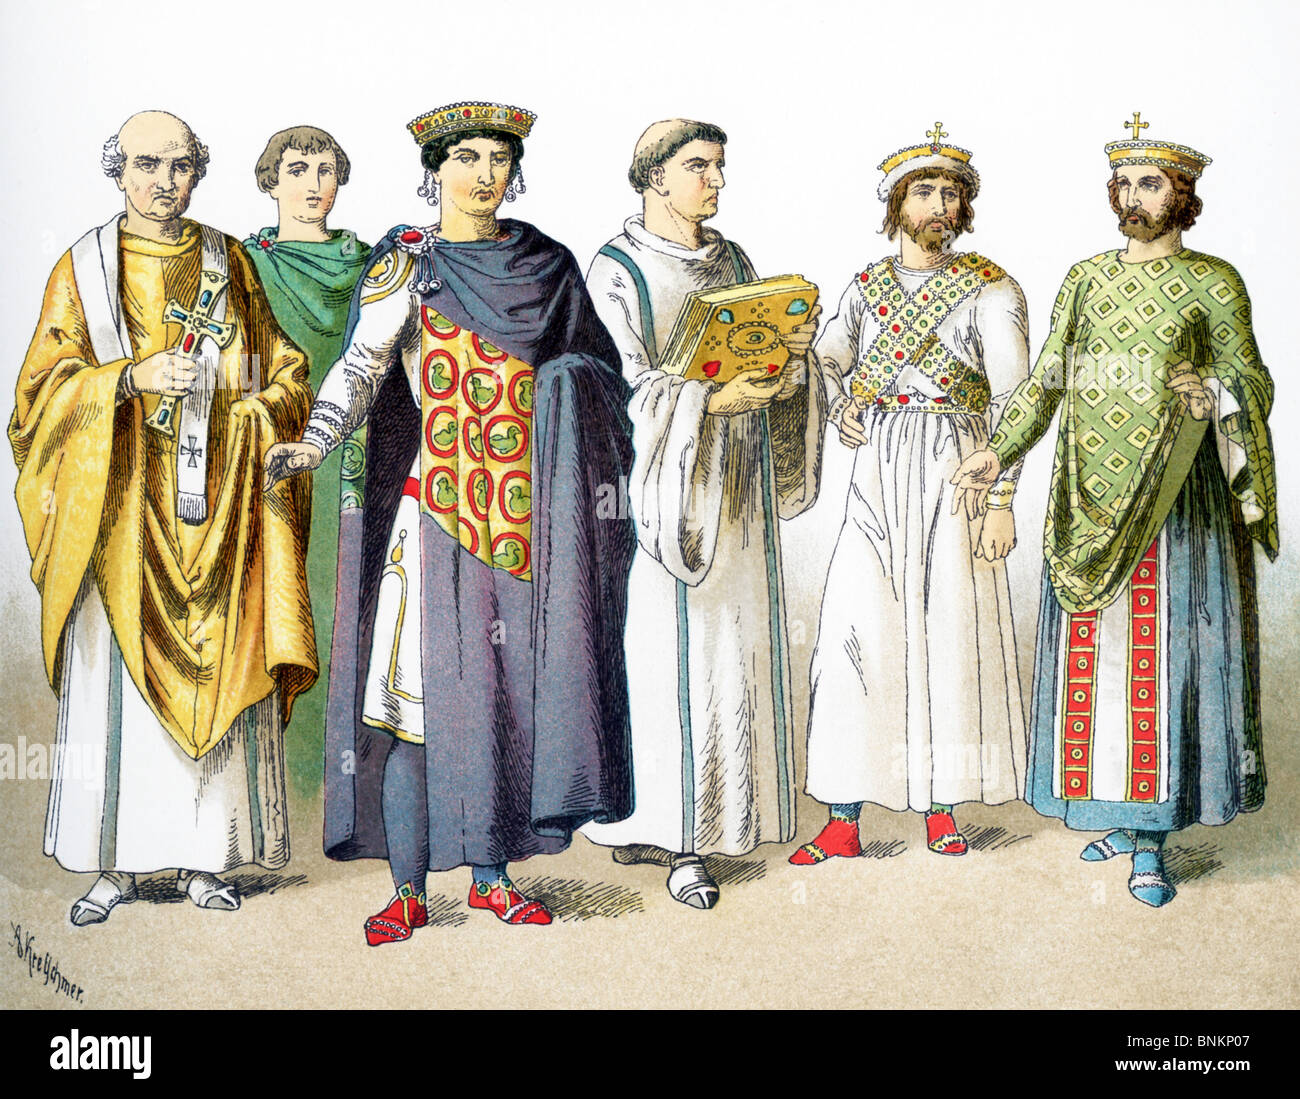 The Byzantine figures (from 300-700) are: Bishop Maximianus, noble, Emperor Justinian, priest, Emperors Phocas and Justinian. Stock Photo